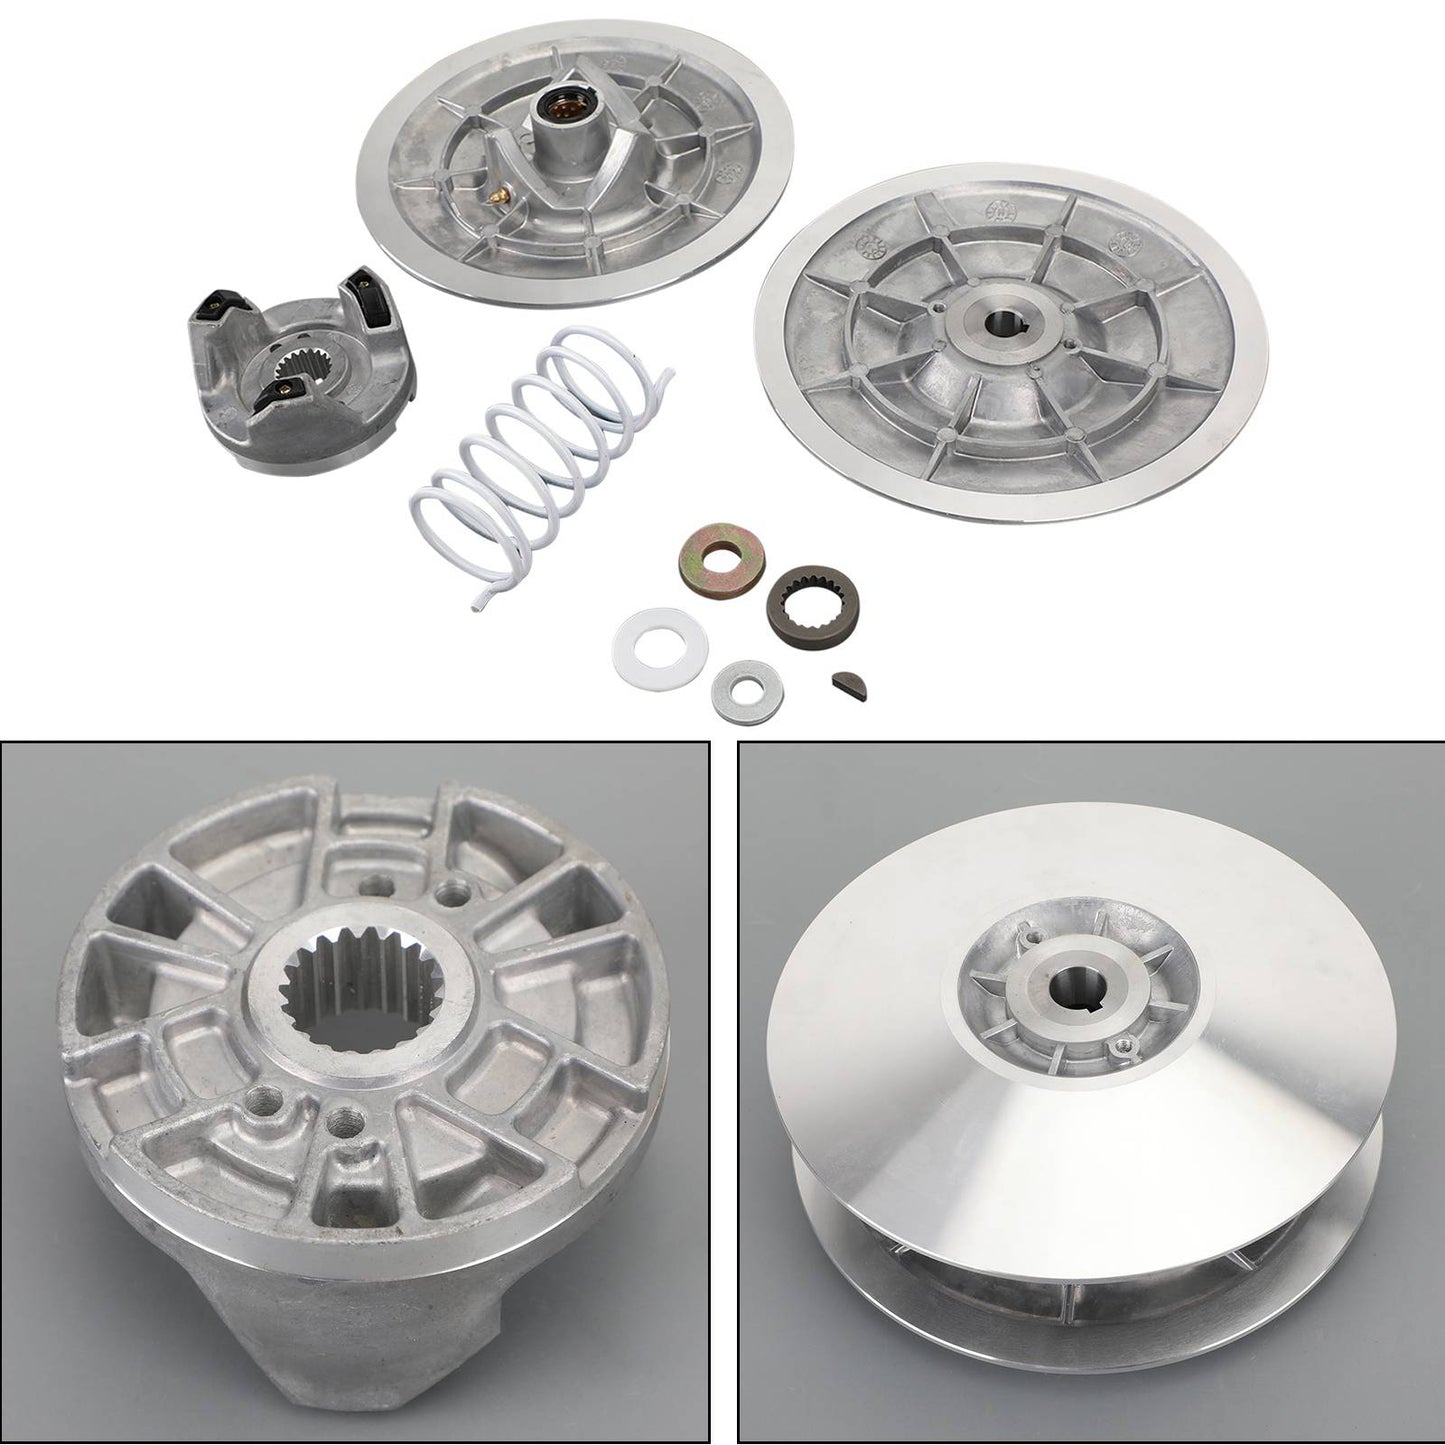 Secondary Driven Clutch Fit For Yamaha Golf Cart 4 Cycle G2 G9 G14 G16 G20 G22 1985-2007